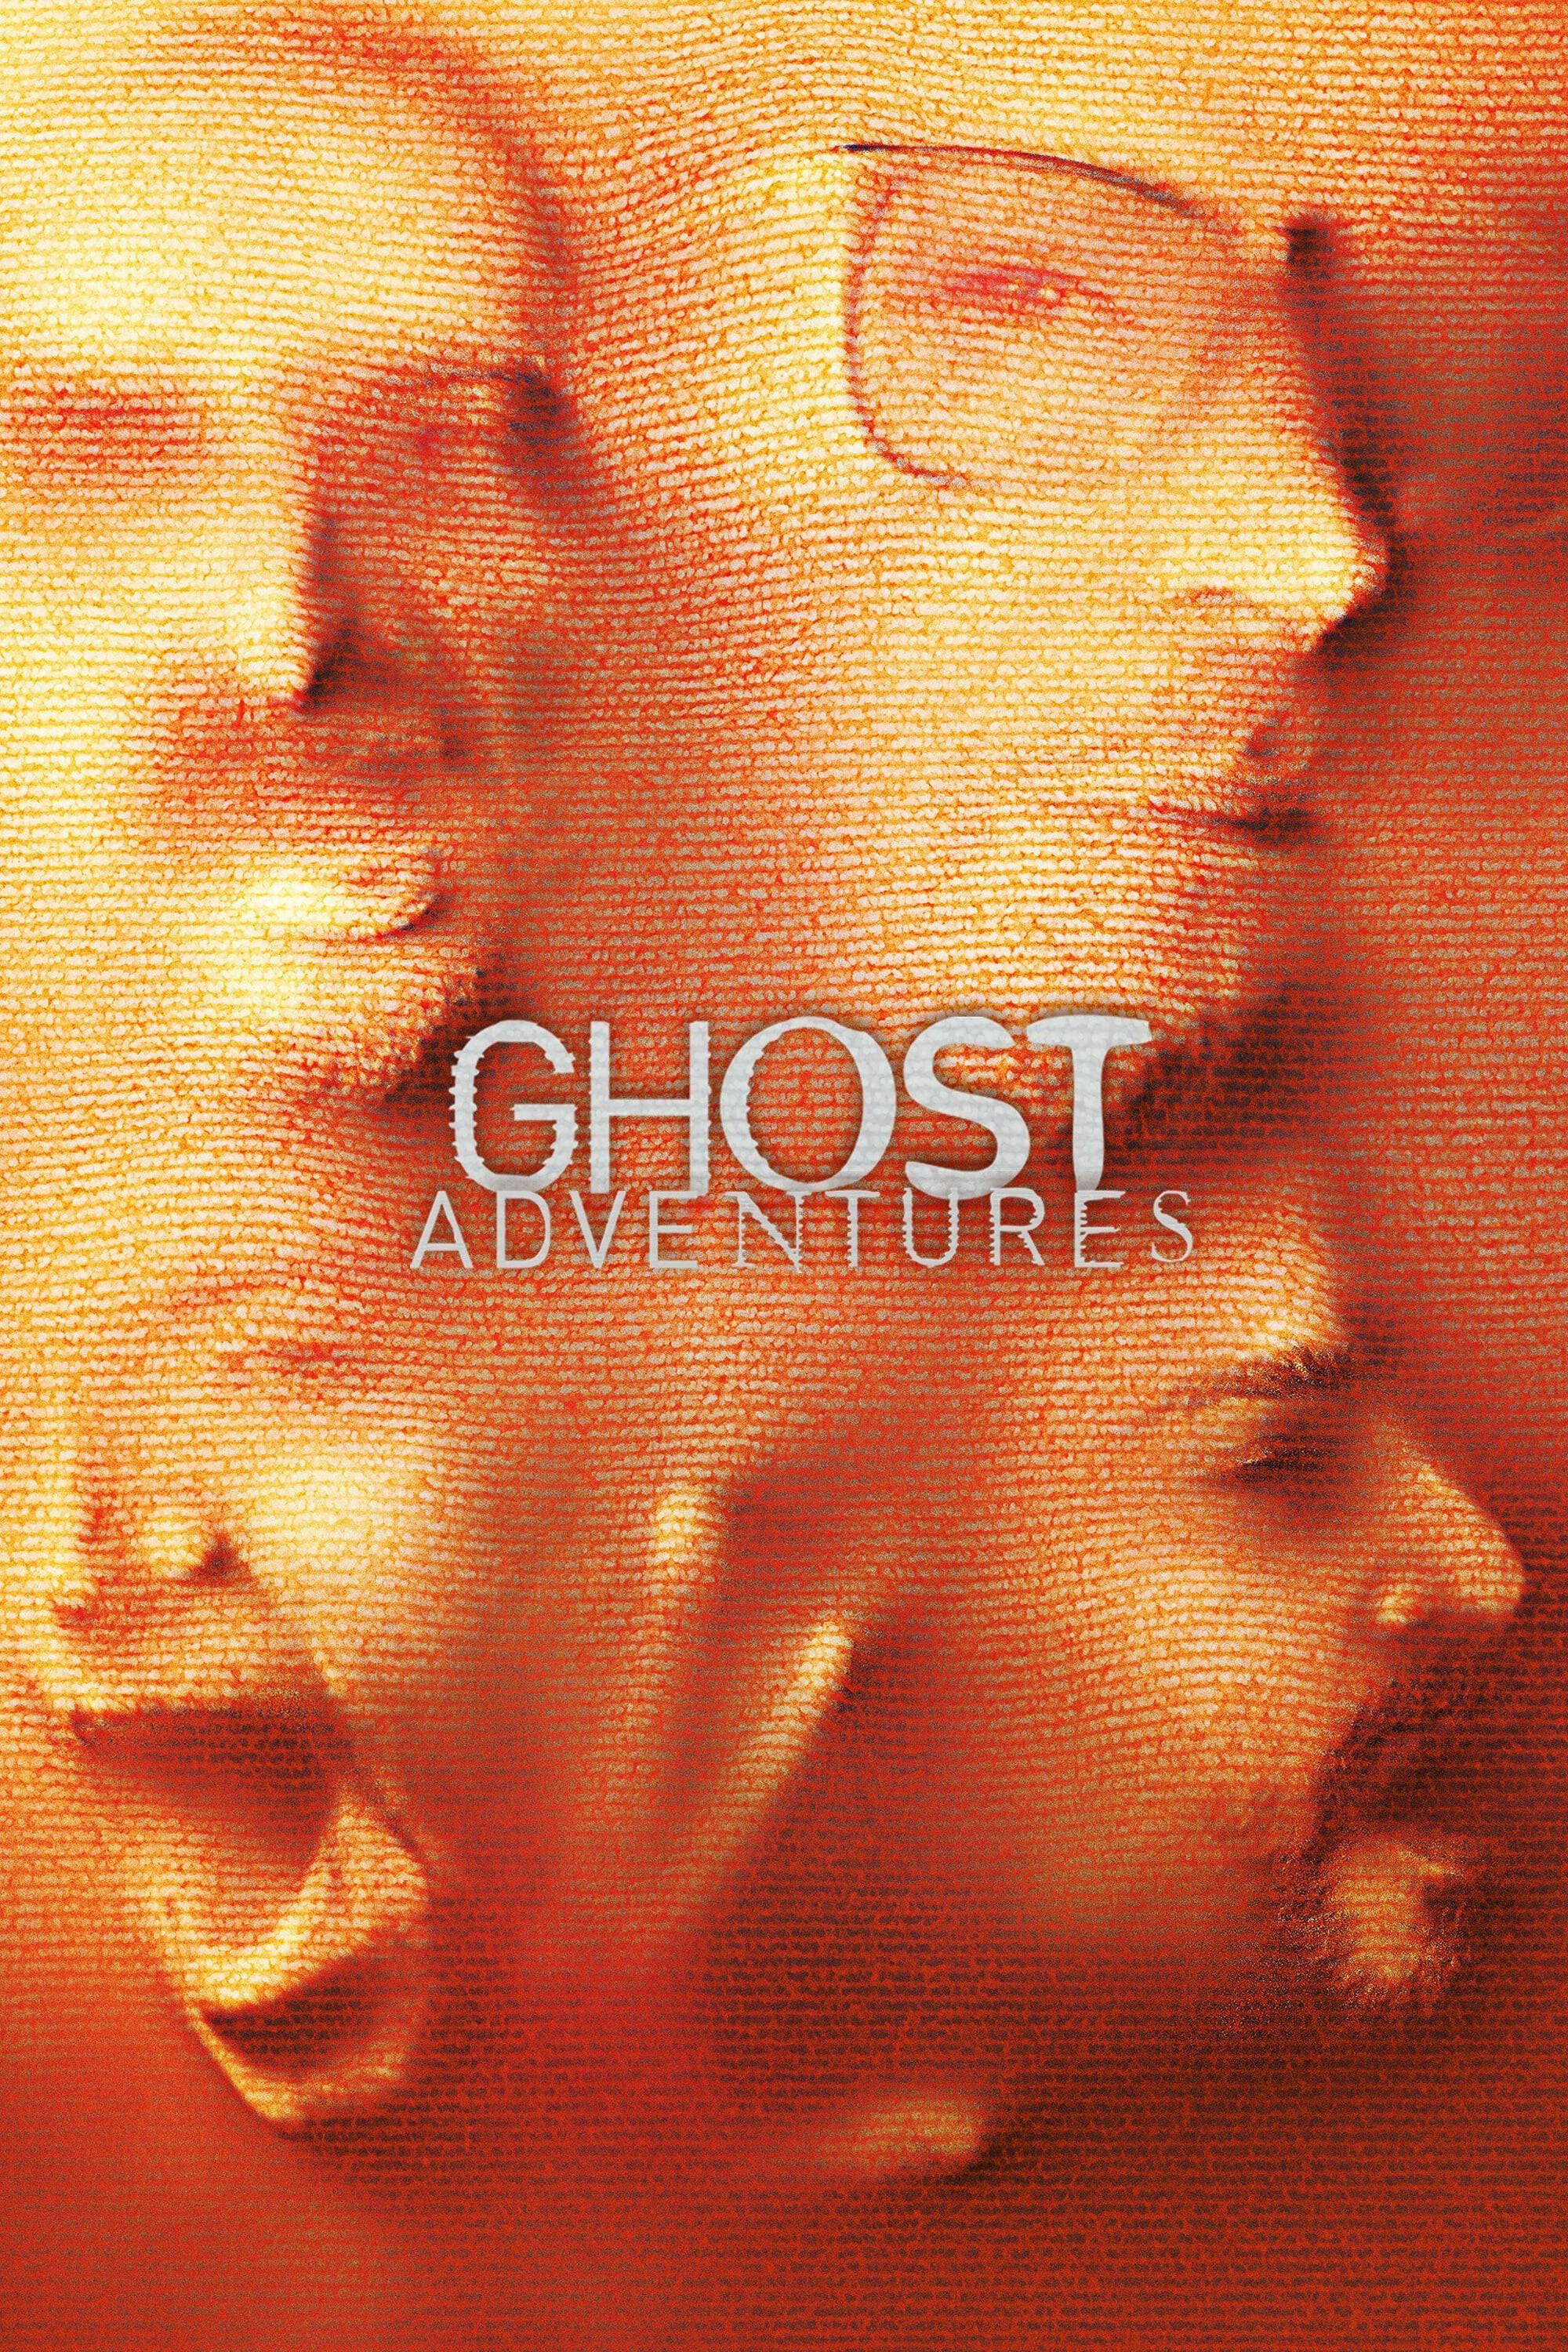 Ghost Adventures (TV Series): One of the most popular shows on the Travel Channel, Mix of paranormal investigation, history, and interpersonal drama. 2000x3000 HD Background.